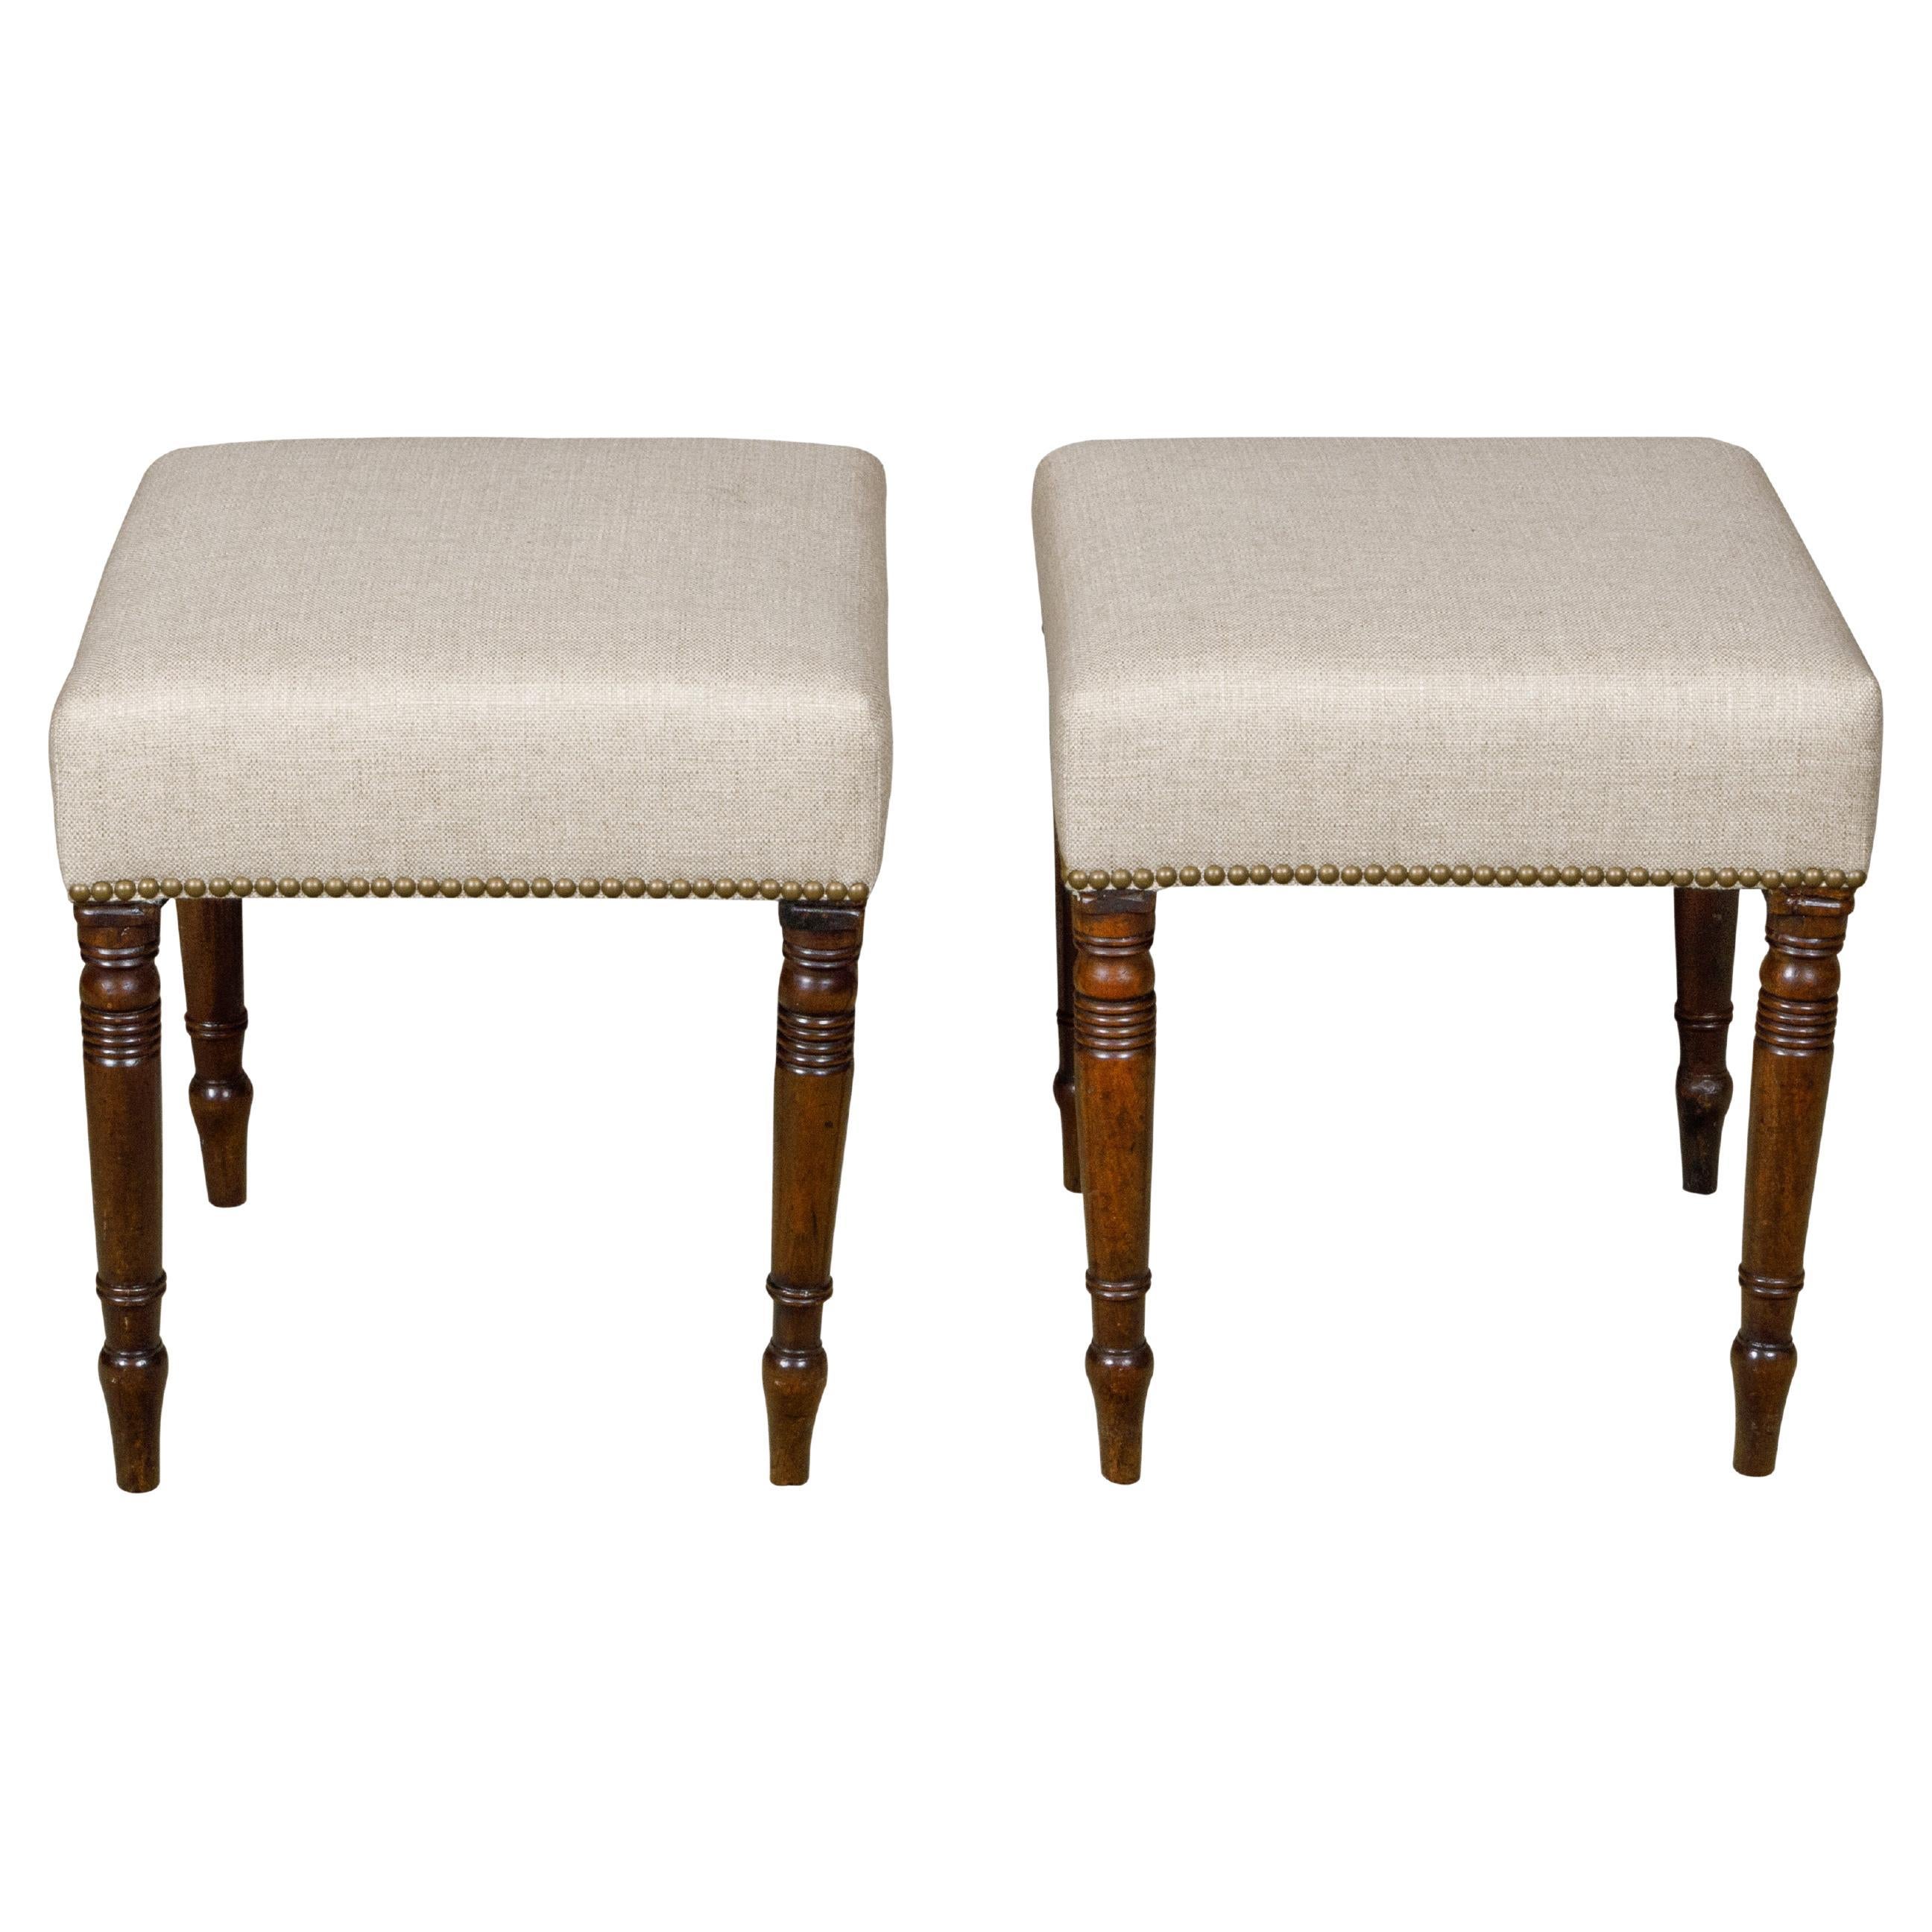 Pair of English Regency 19th Century Mahogany Stools with Turned Spindle Legs